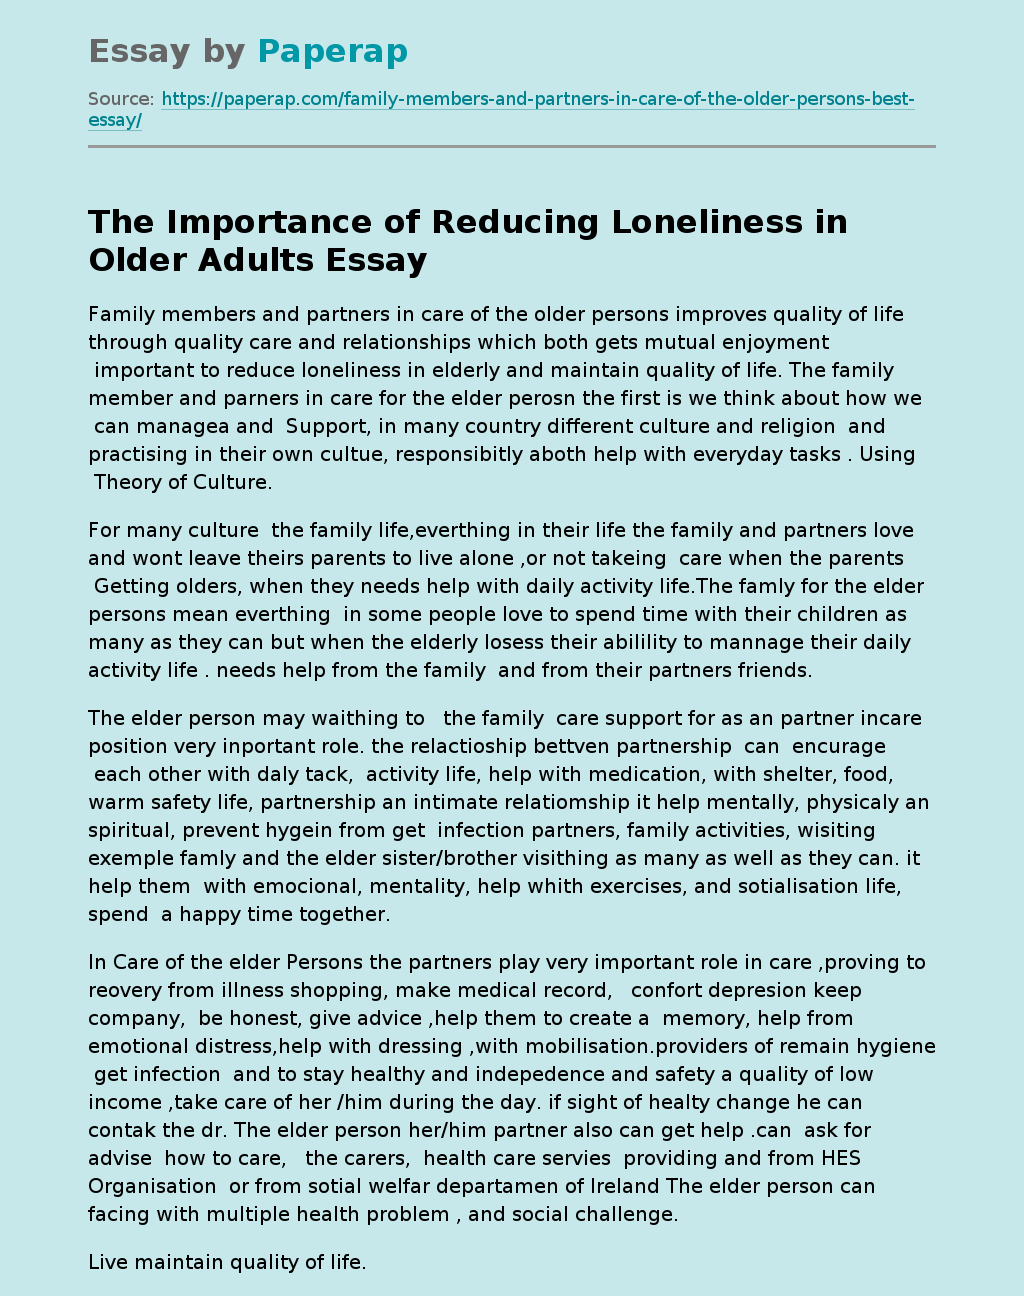 The Importance of Reducing Loneliness in Older Adults